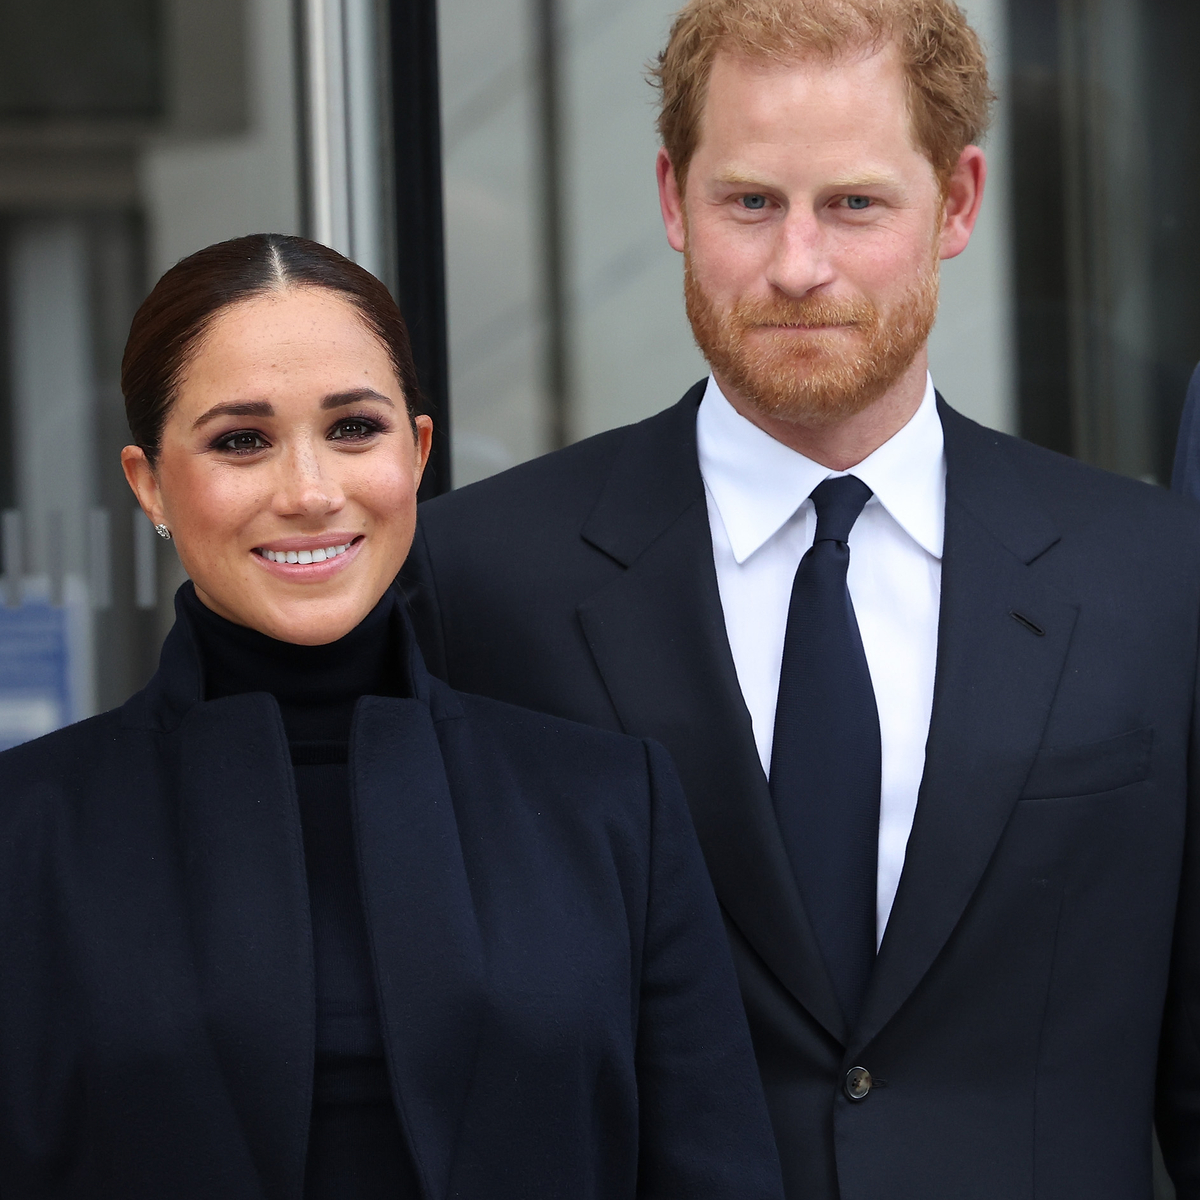 Meghan Markle & Prince Harry’s Charity Addresses Delinquency Debacle